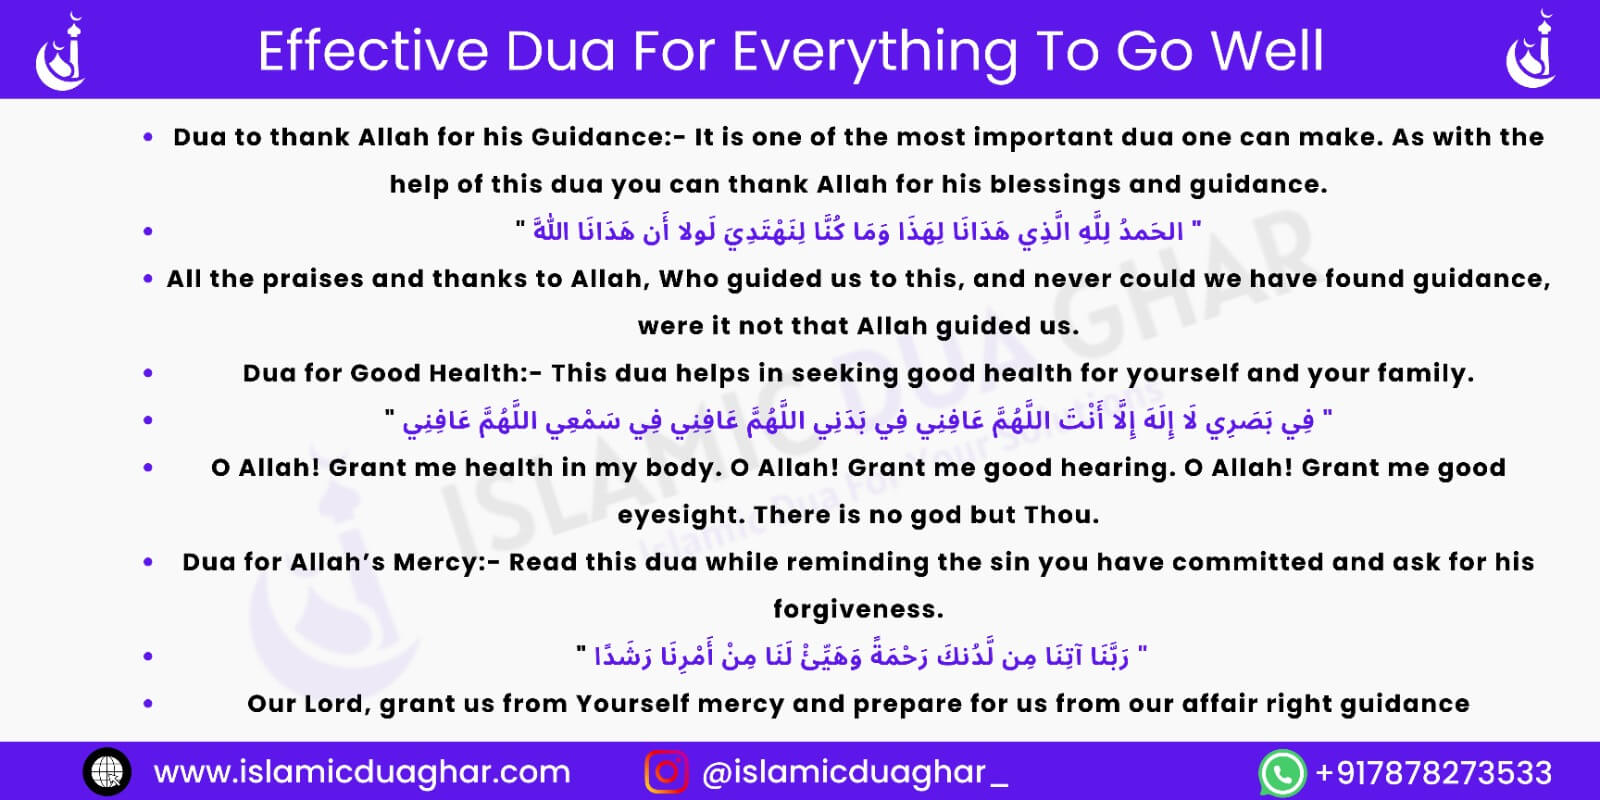 Effective Dua For Everything To Go Well